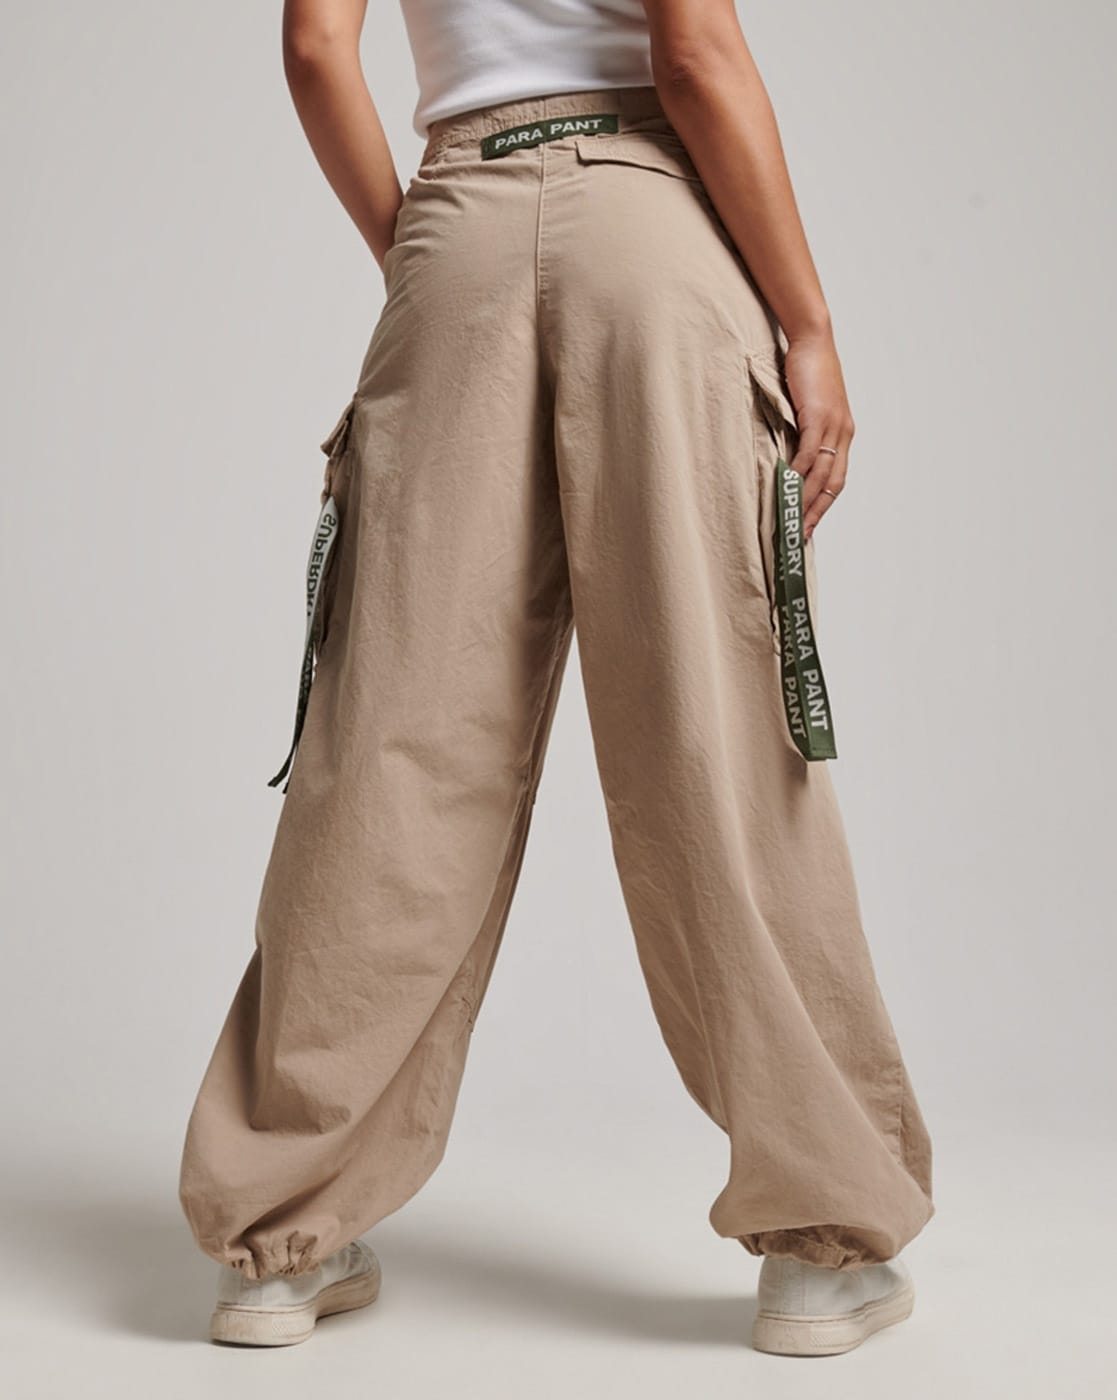 Baggy Pants For Women at Rs 200/piece in New Delhi